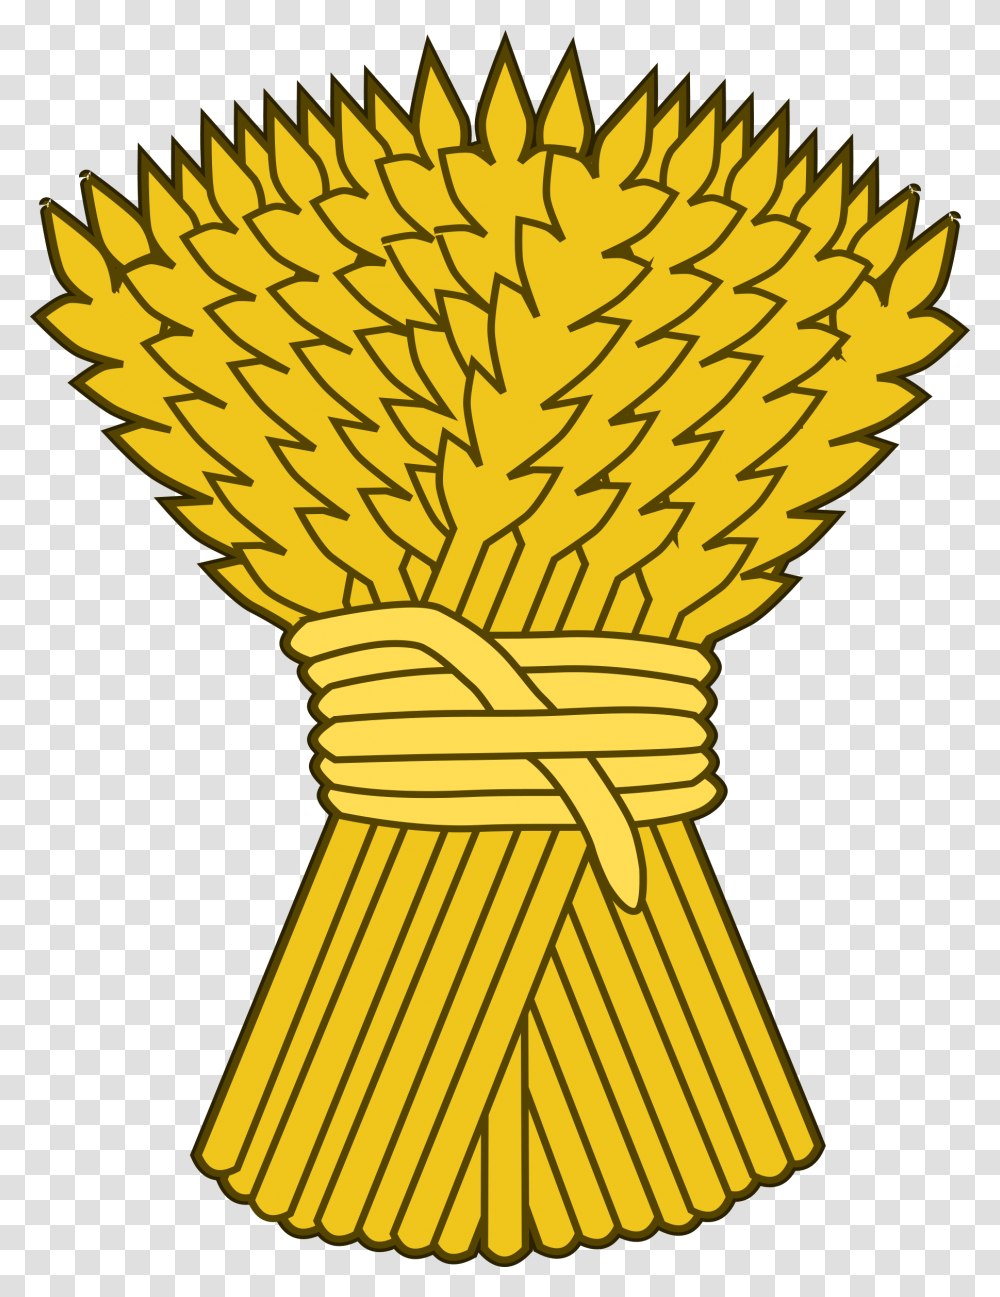 Wheat Sheaf, Plant, Food, Mixer, Appliance Transparent Png